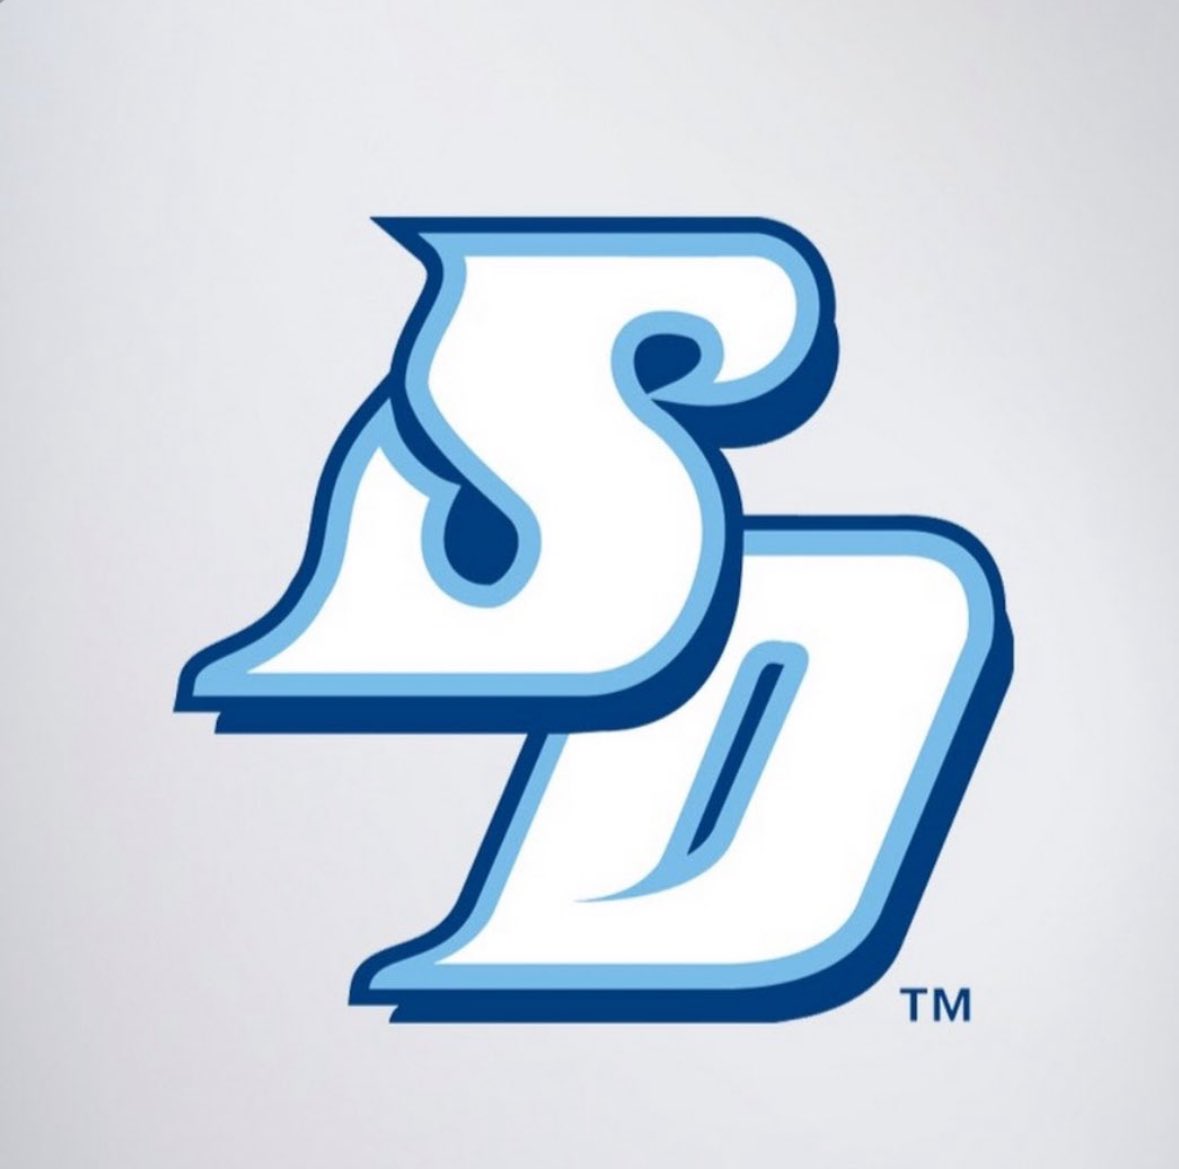 God is good! Thankful and blessed to have received my second Division 1 offer from the University of San Diego! @coach_MAponte @CoachDrew18 #GoToreros